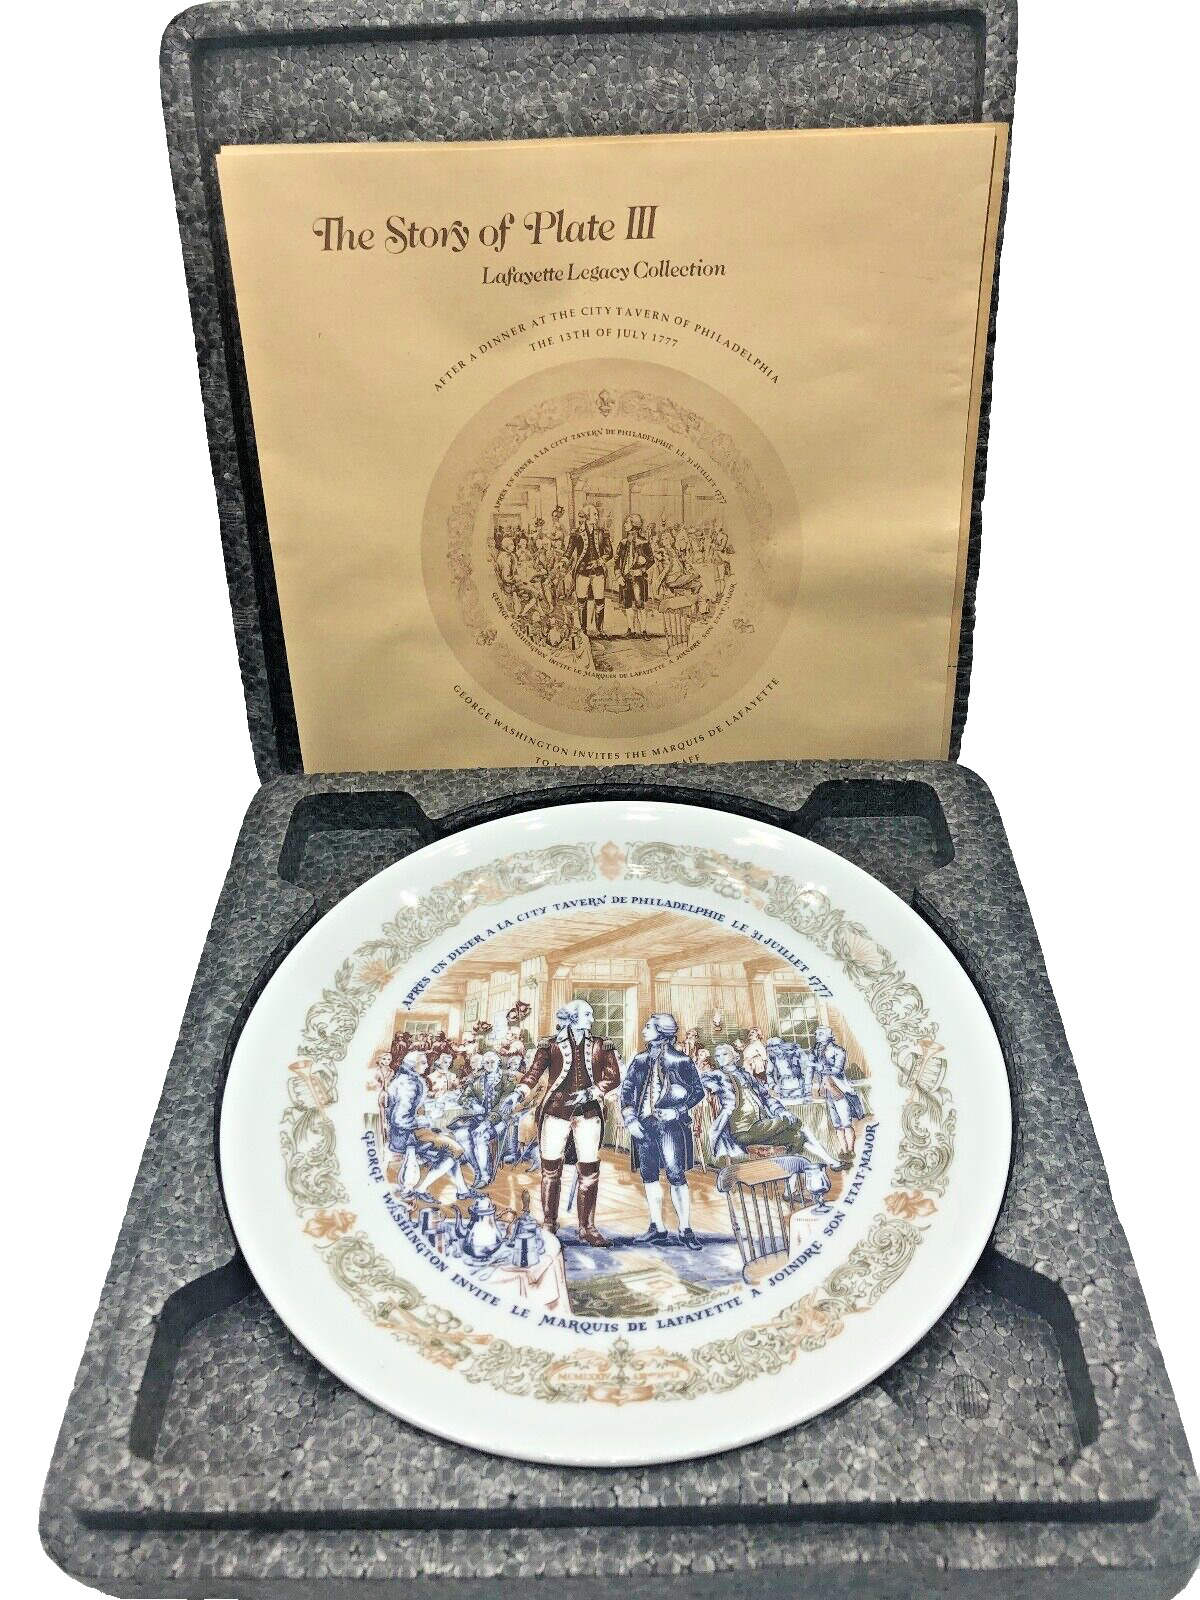 Vintage The Story of Plate III Lafayette Legacy Collection Plate No.354 1974